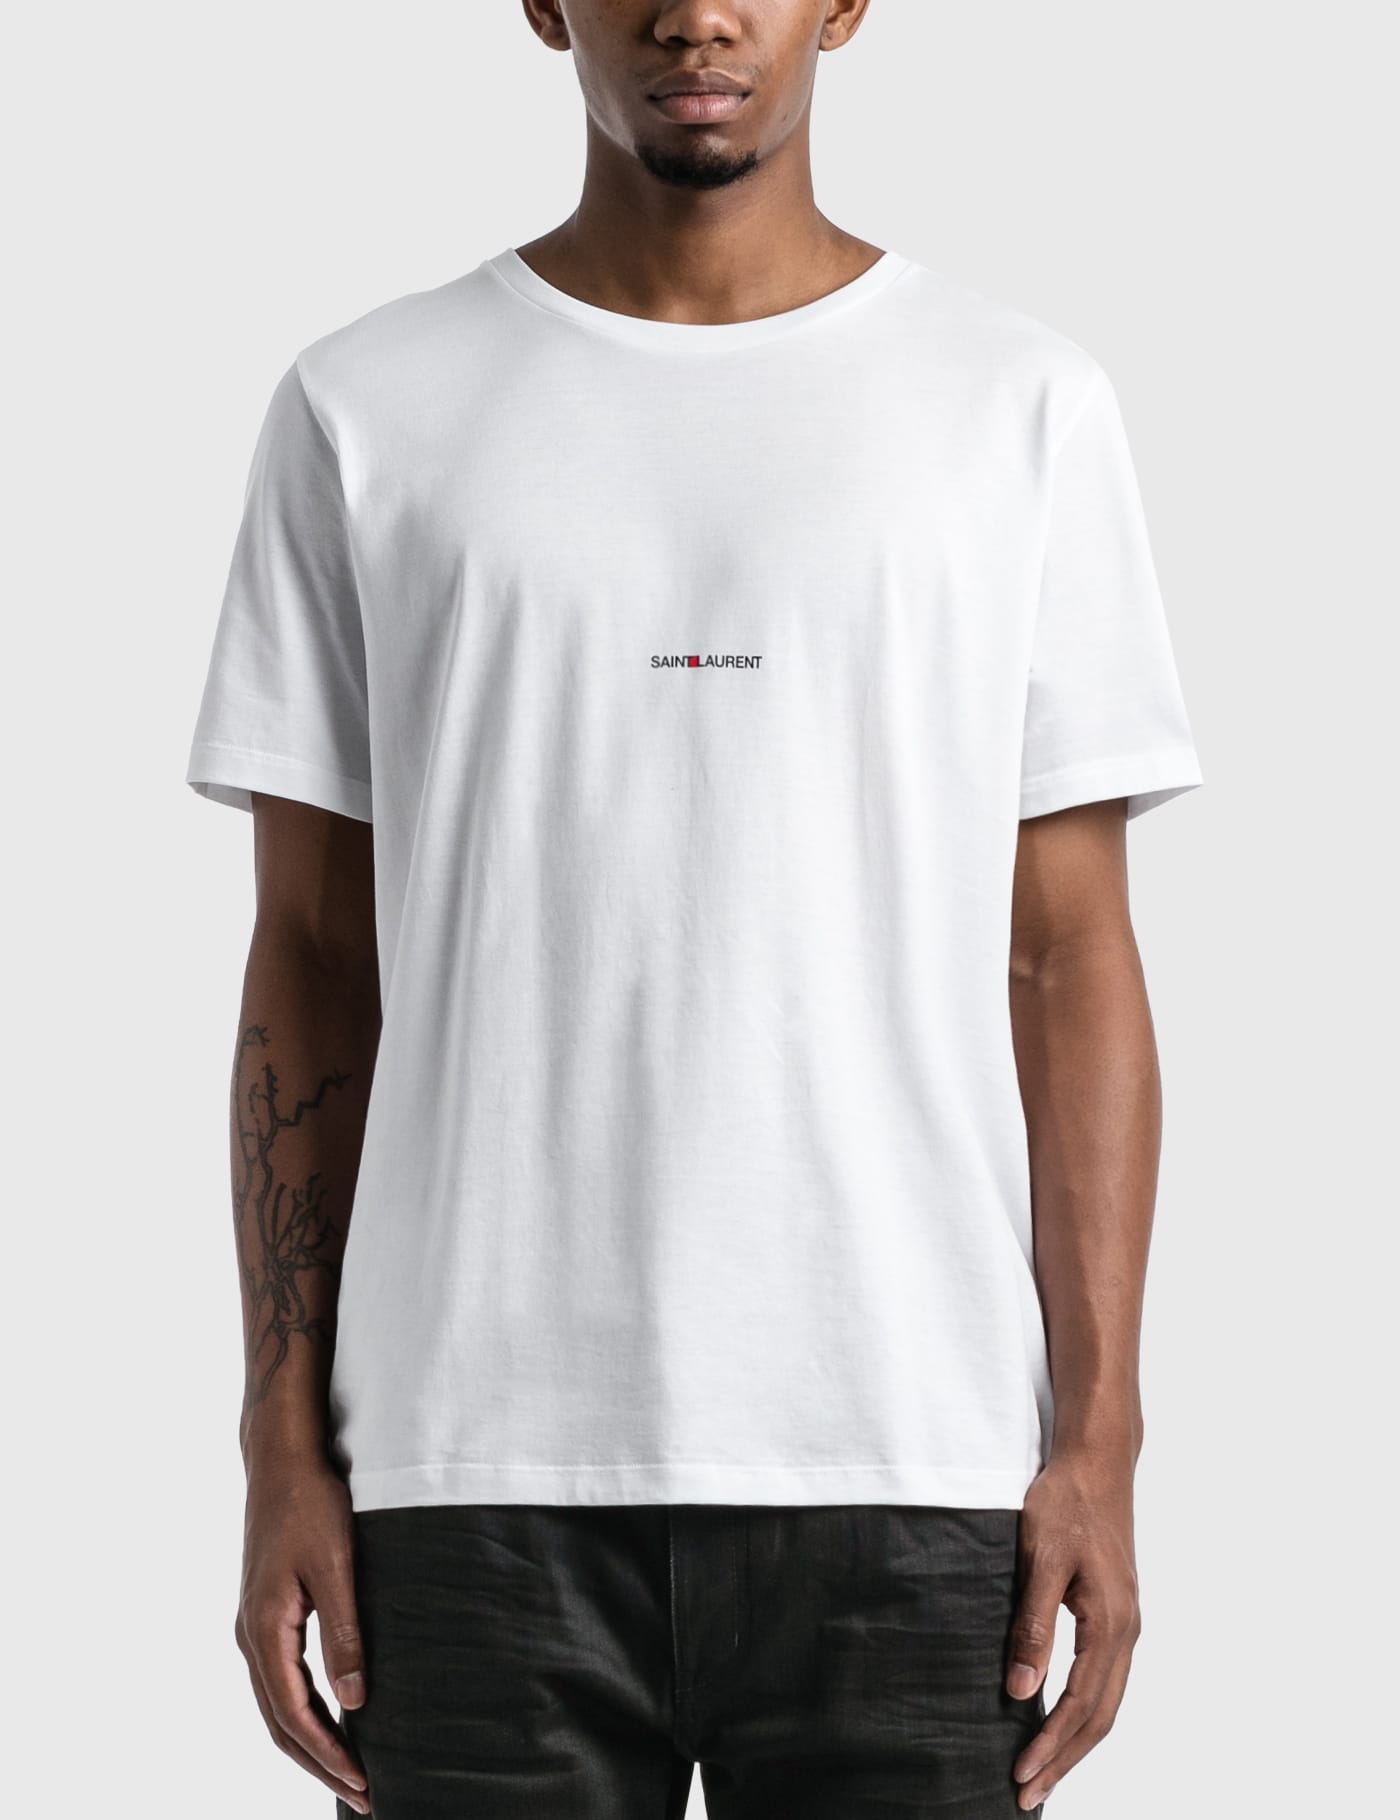 Saint Laurent - Saint Laurent Logo T-Shirt | HBX - Globally Curated Fashion  and Lifestyle by Hypebeast